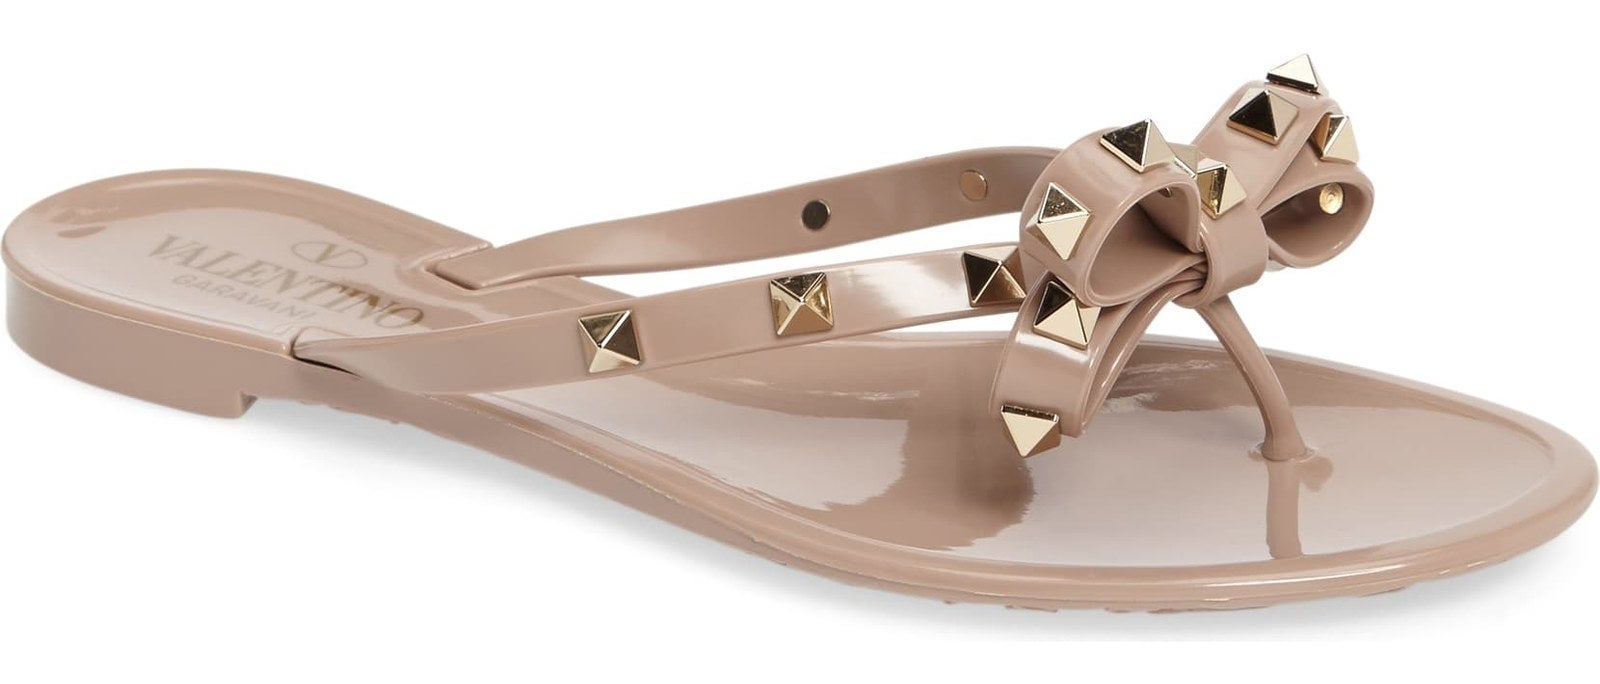 99 Of The Best Sandals You Can Get Online